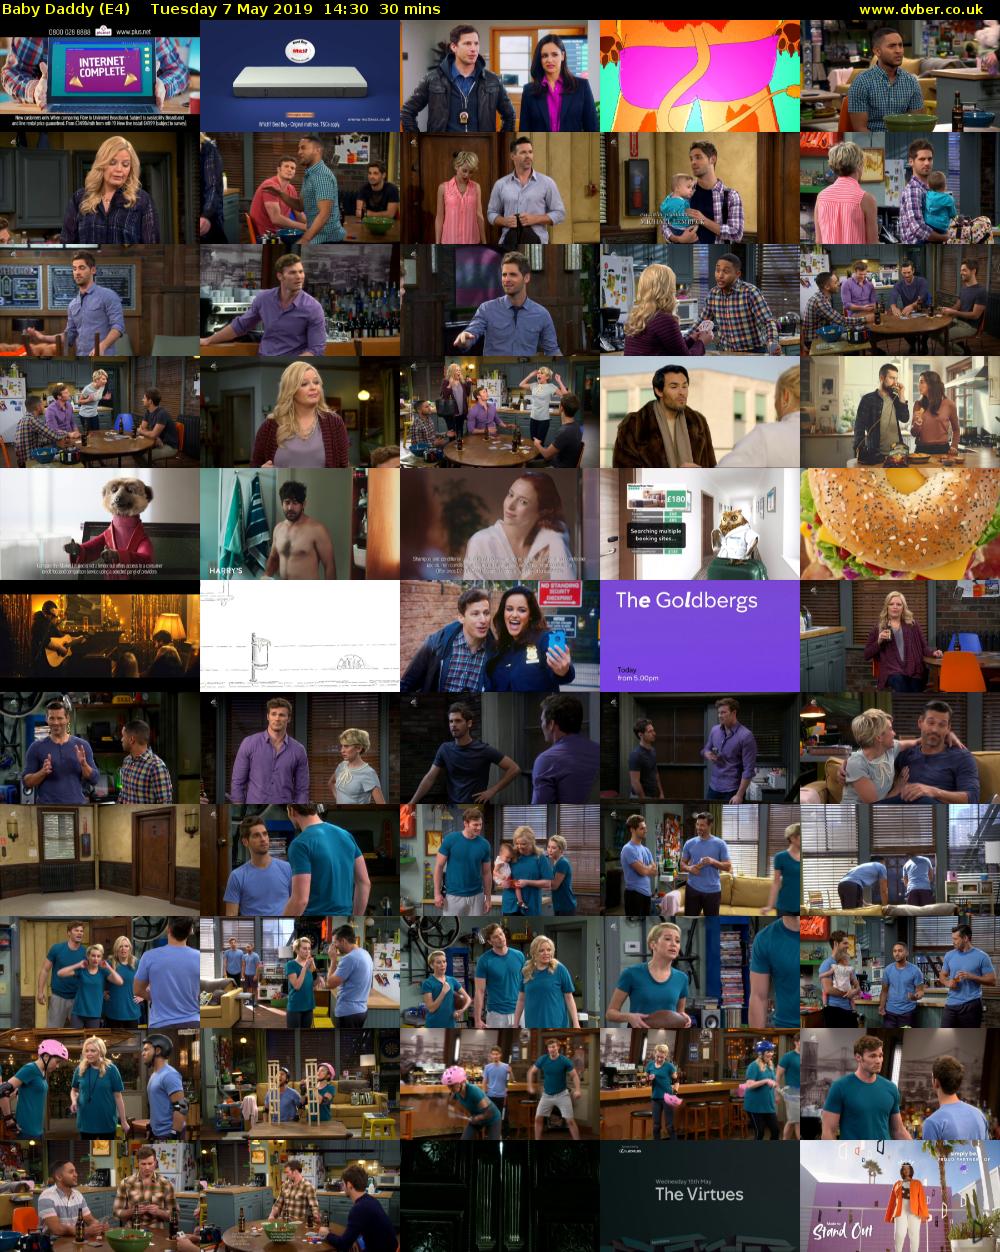 Baby Daddy (E4) Tuesday 7 May 2019 14:30 - 15:00